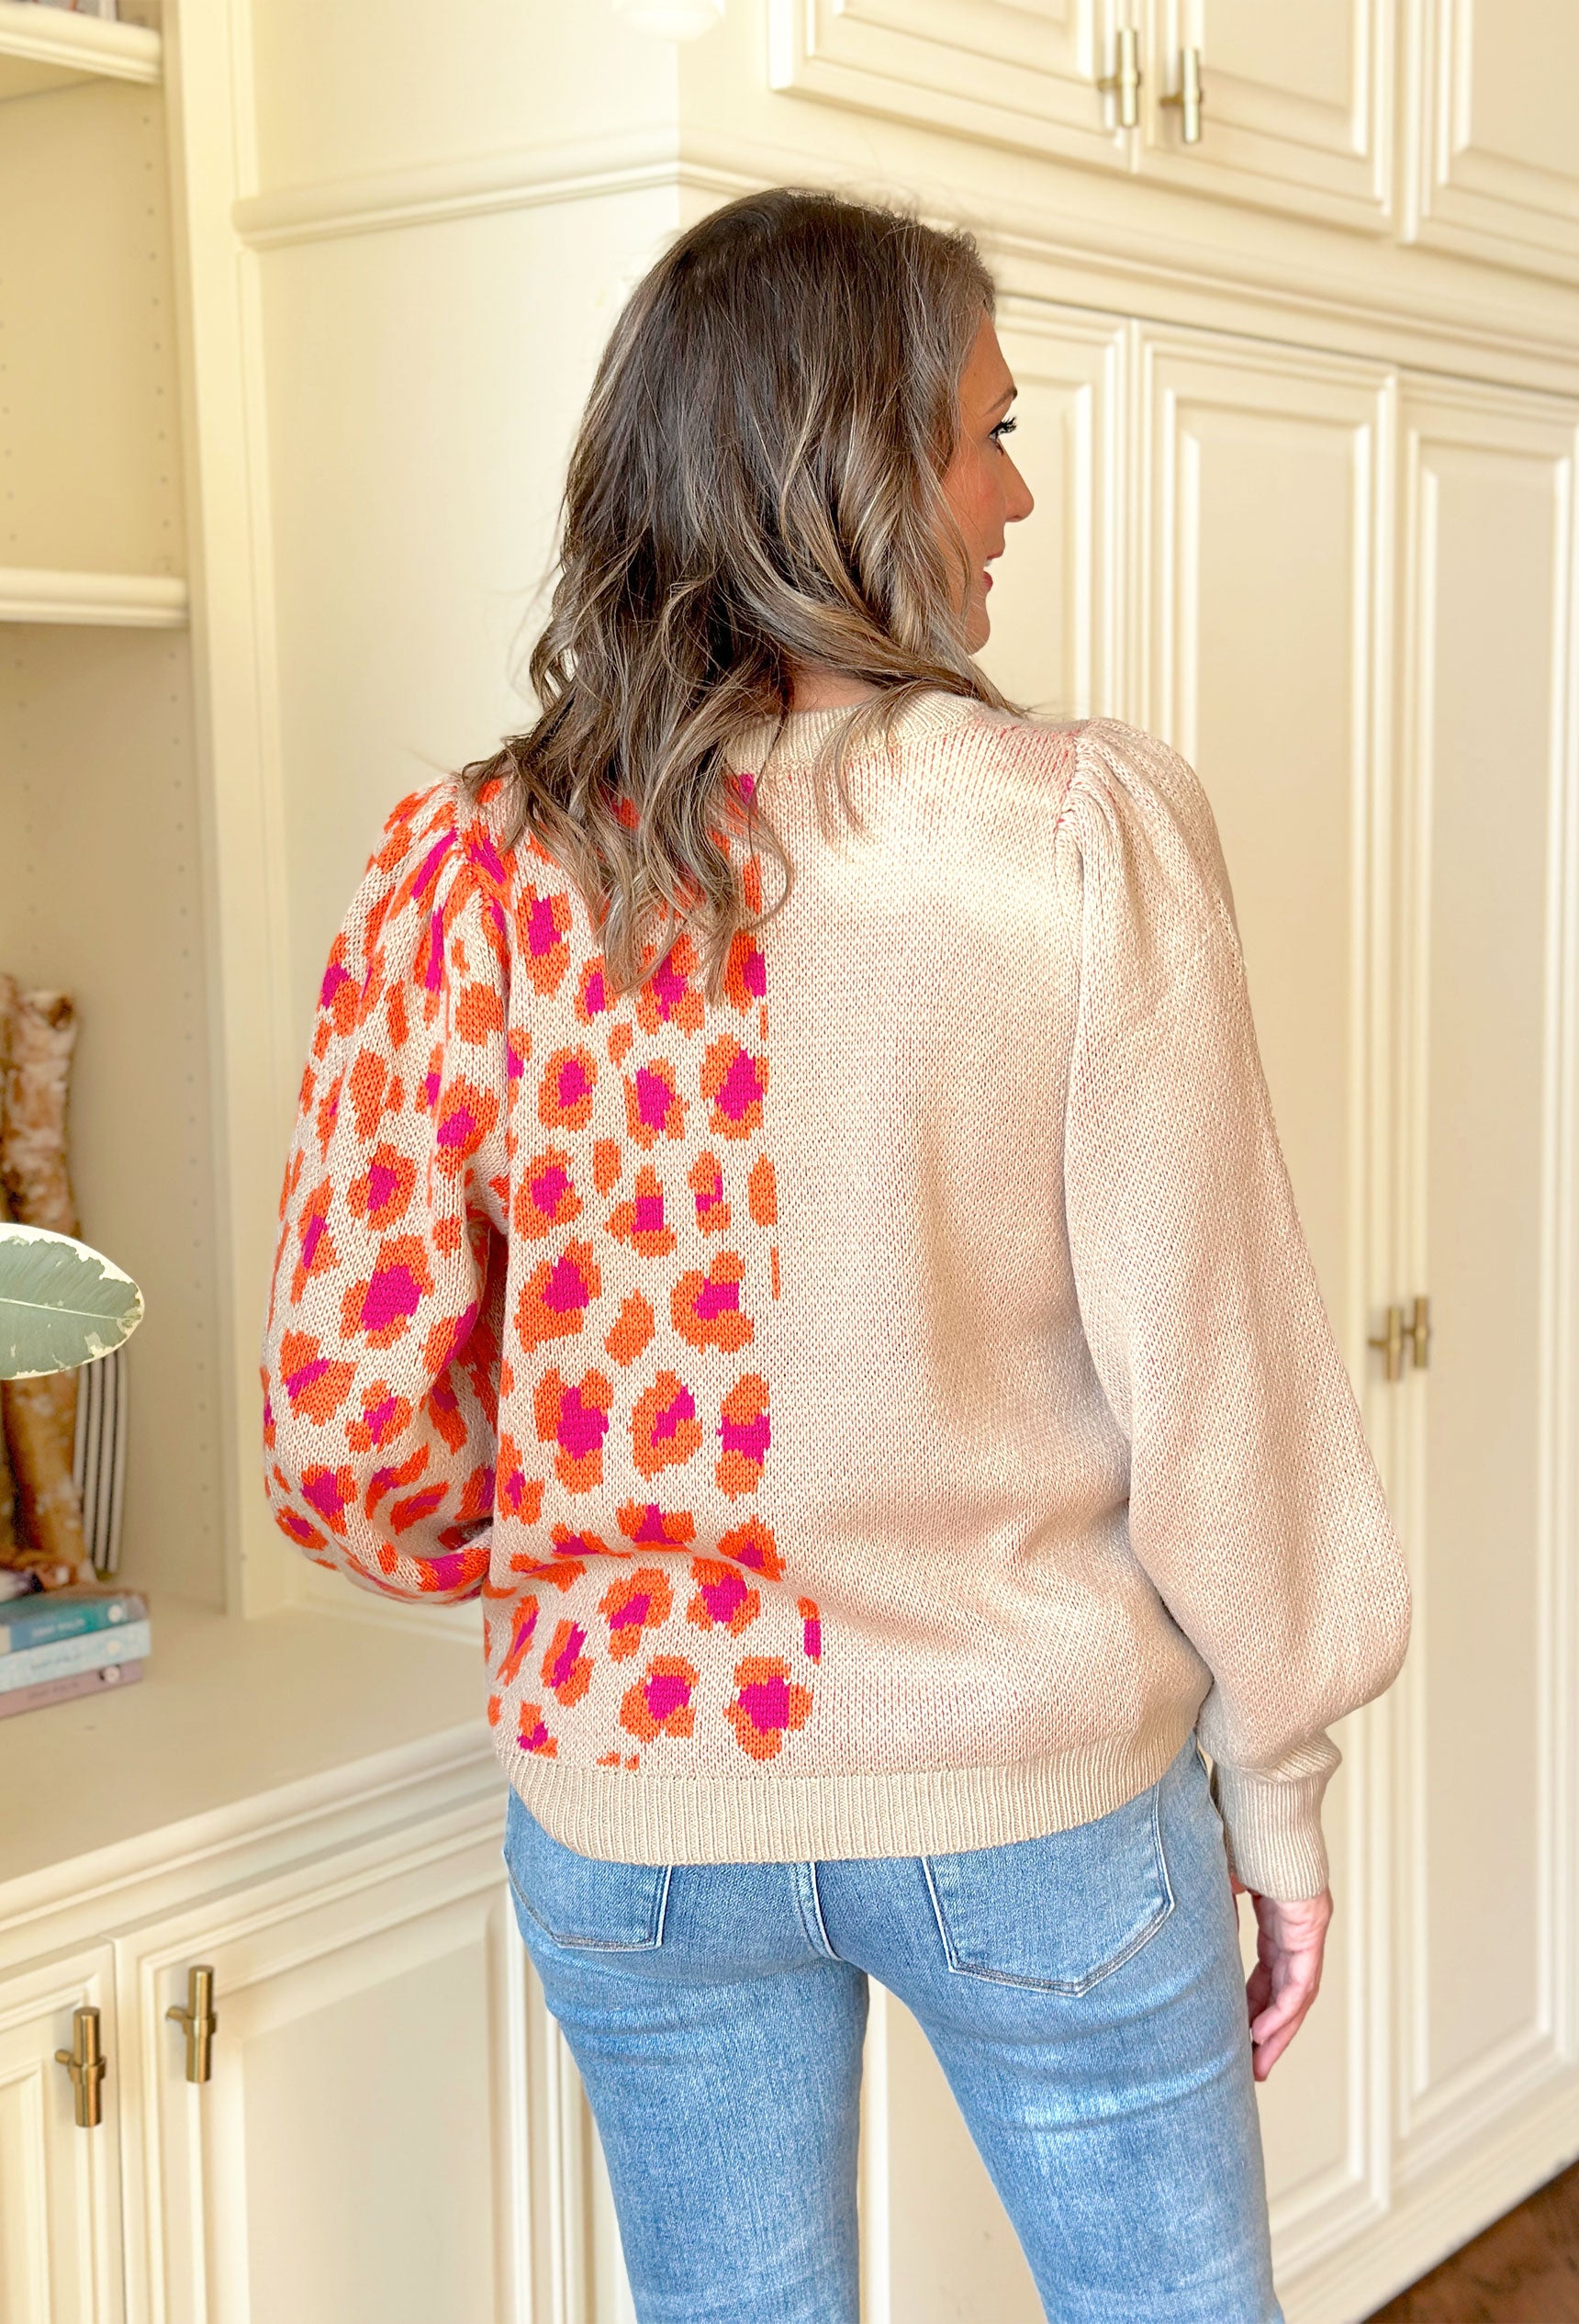 Leopard Love Sweater, tan sweater with half being pink and orange leopard